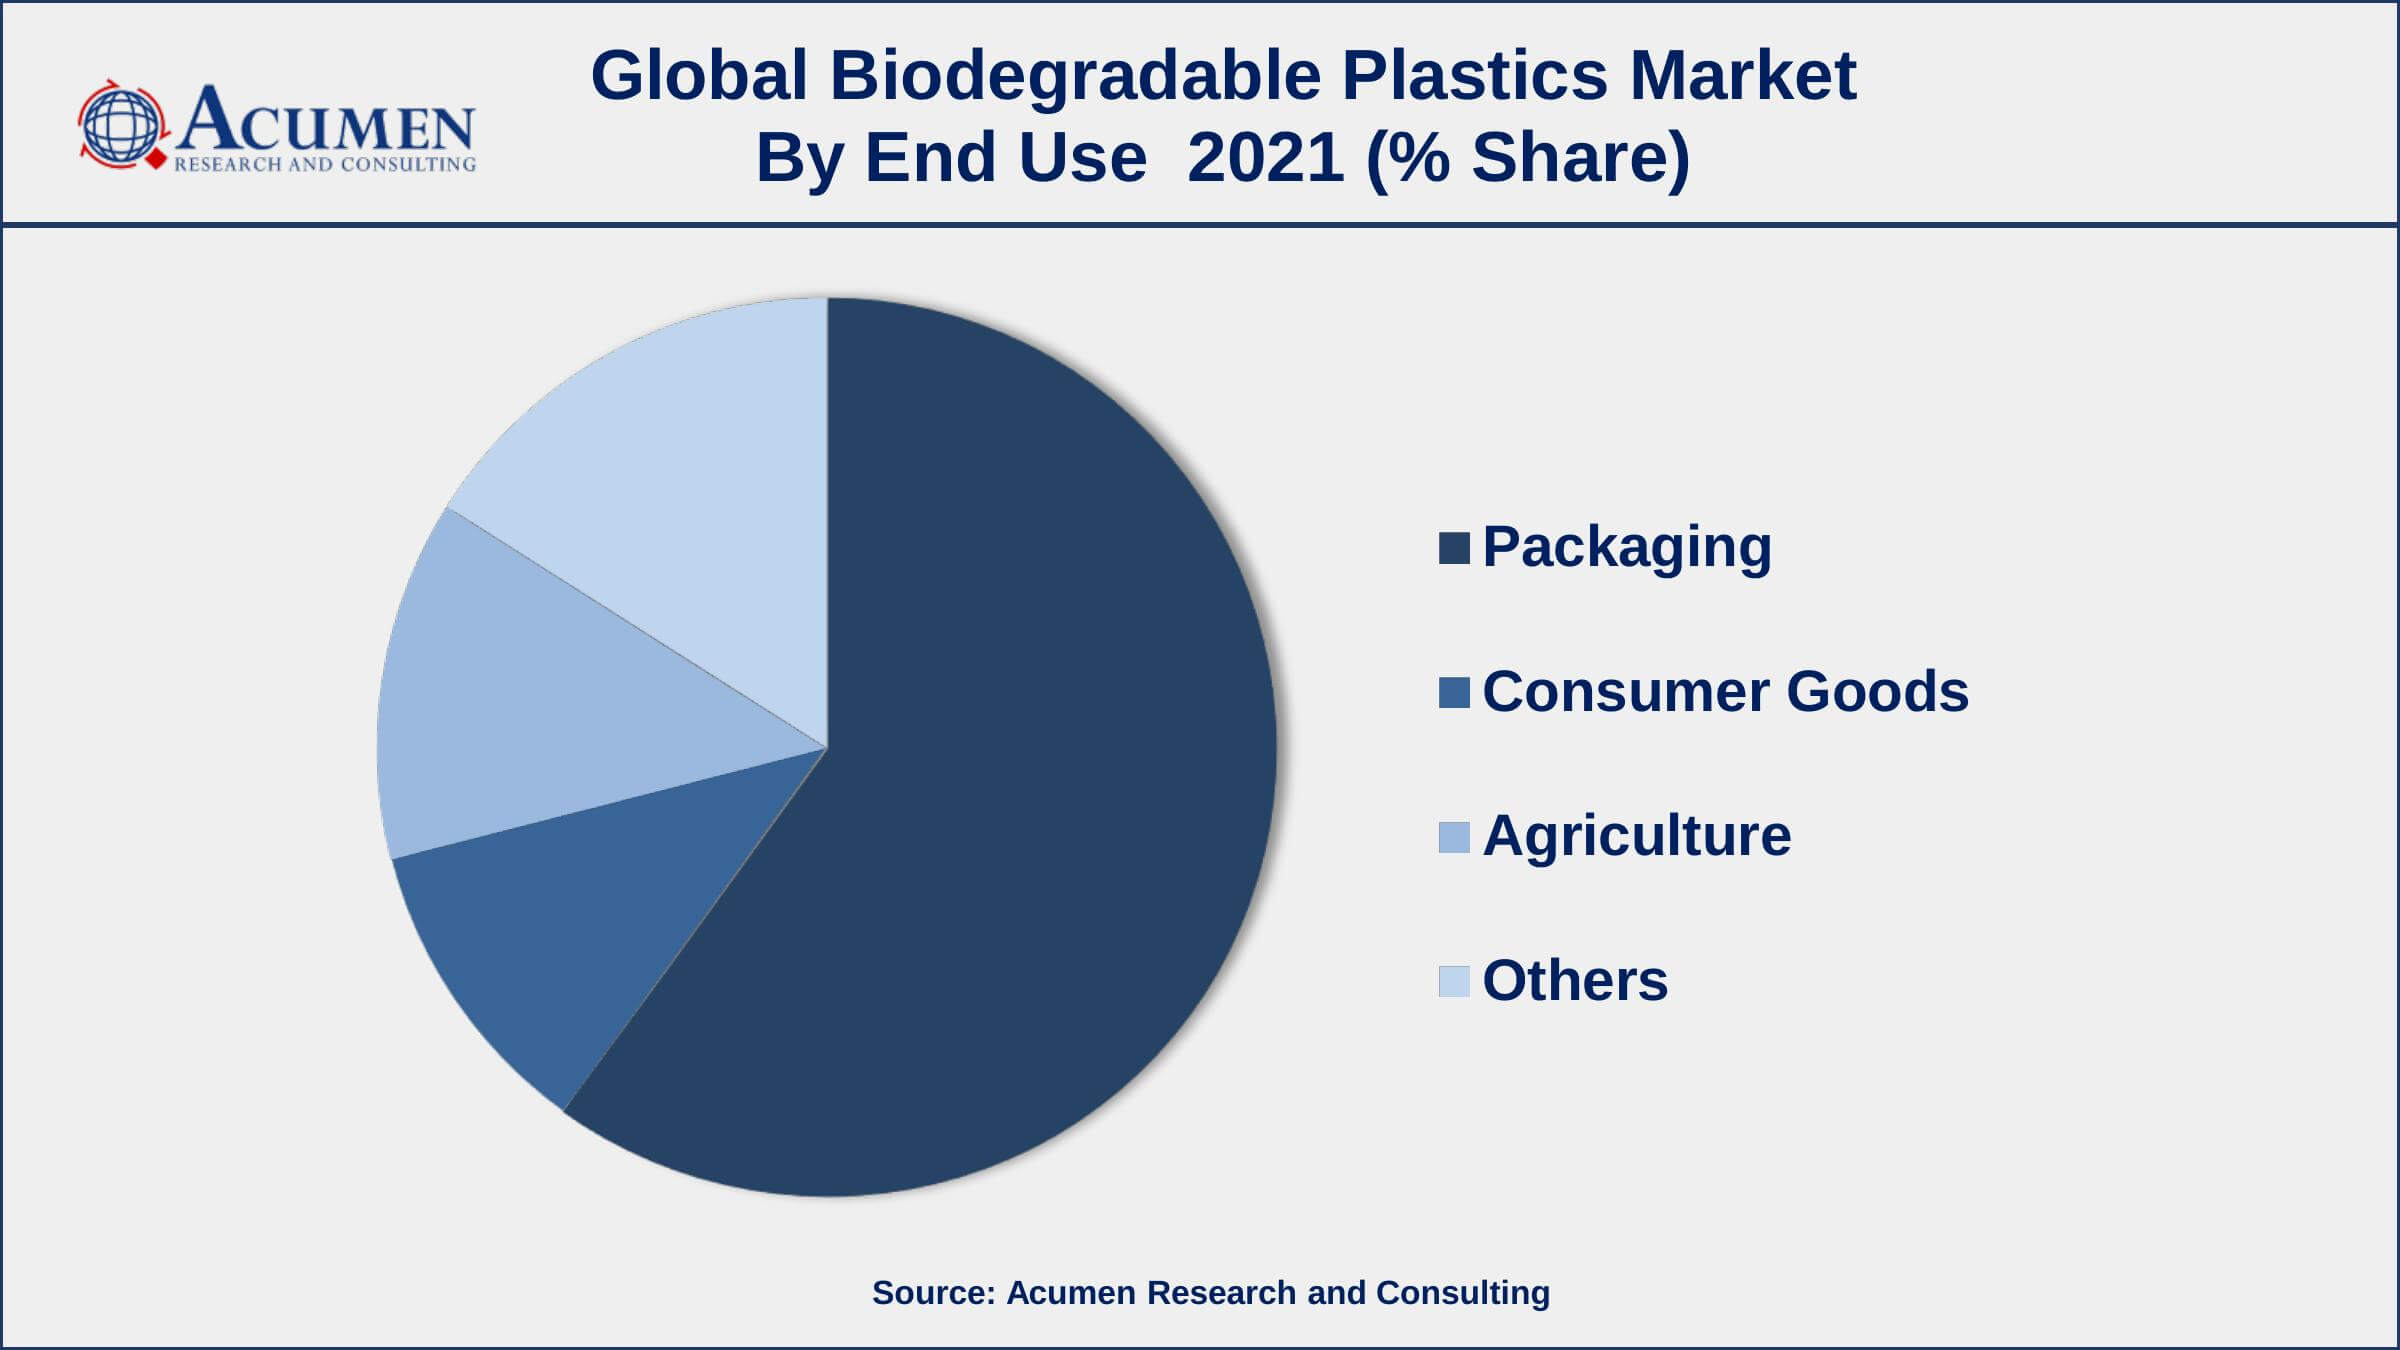 Among end use, packaging segment engaged more than 59.2% of the total market share